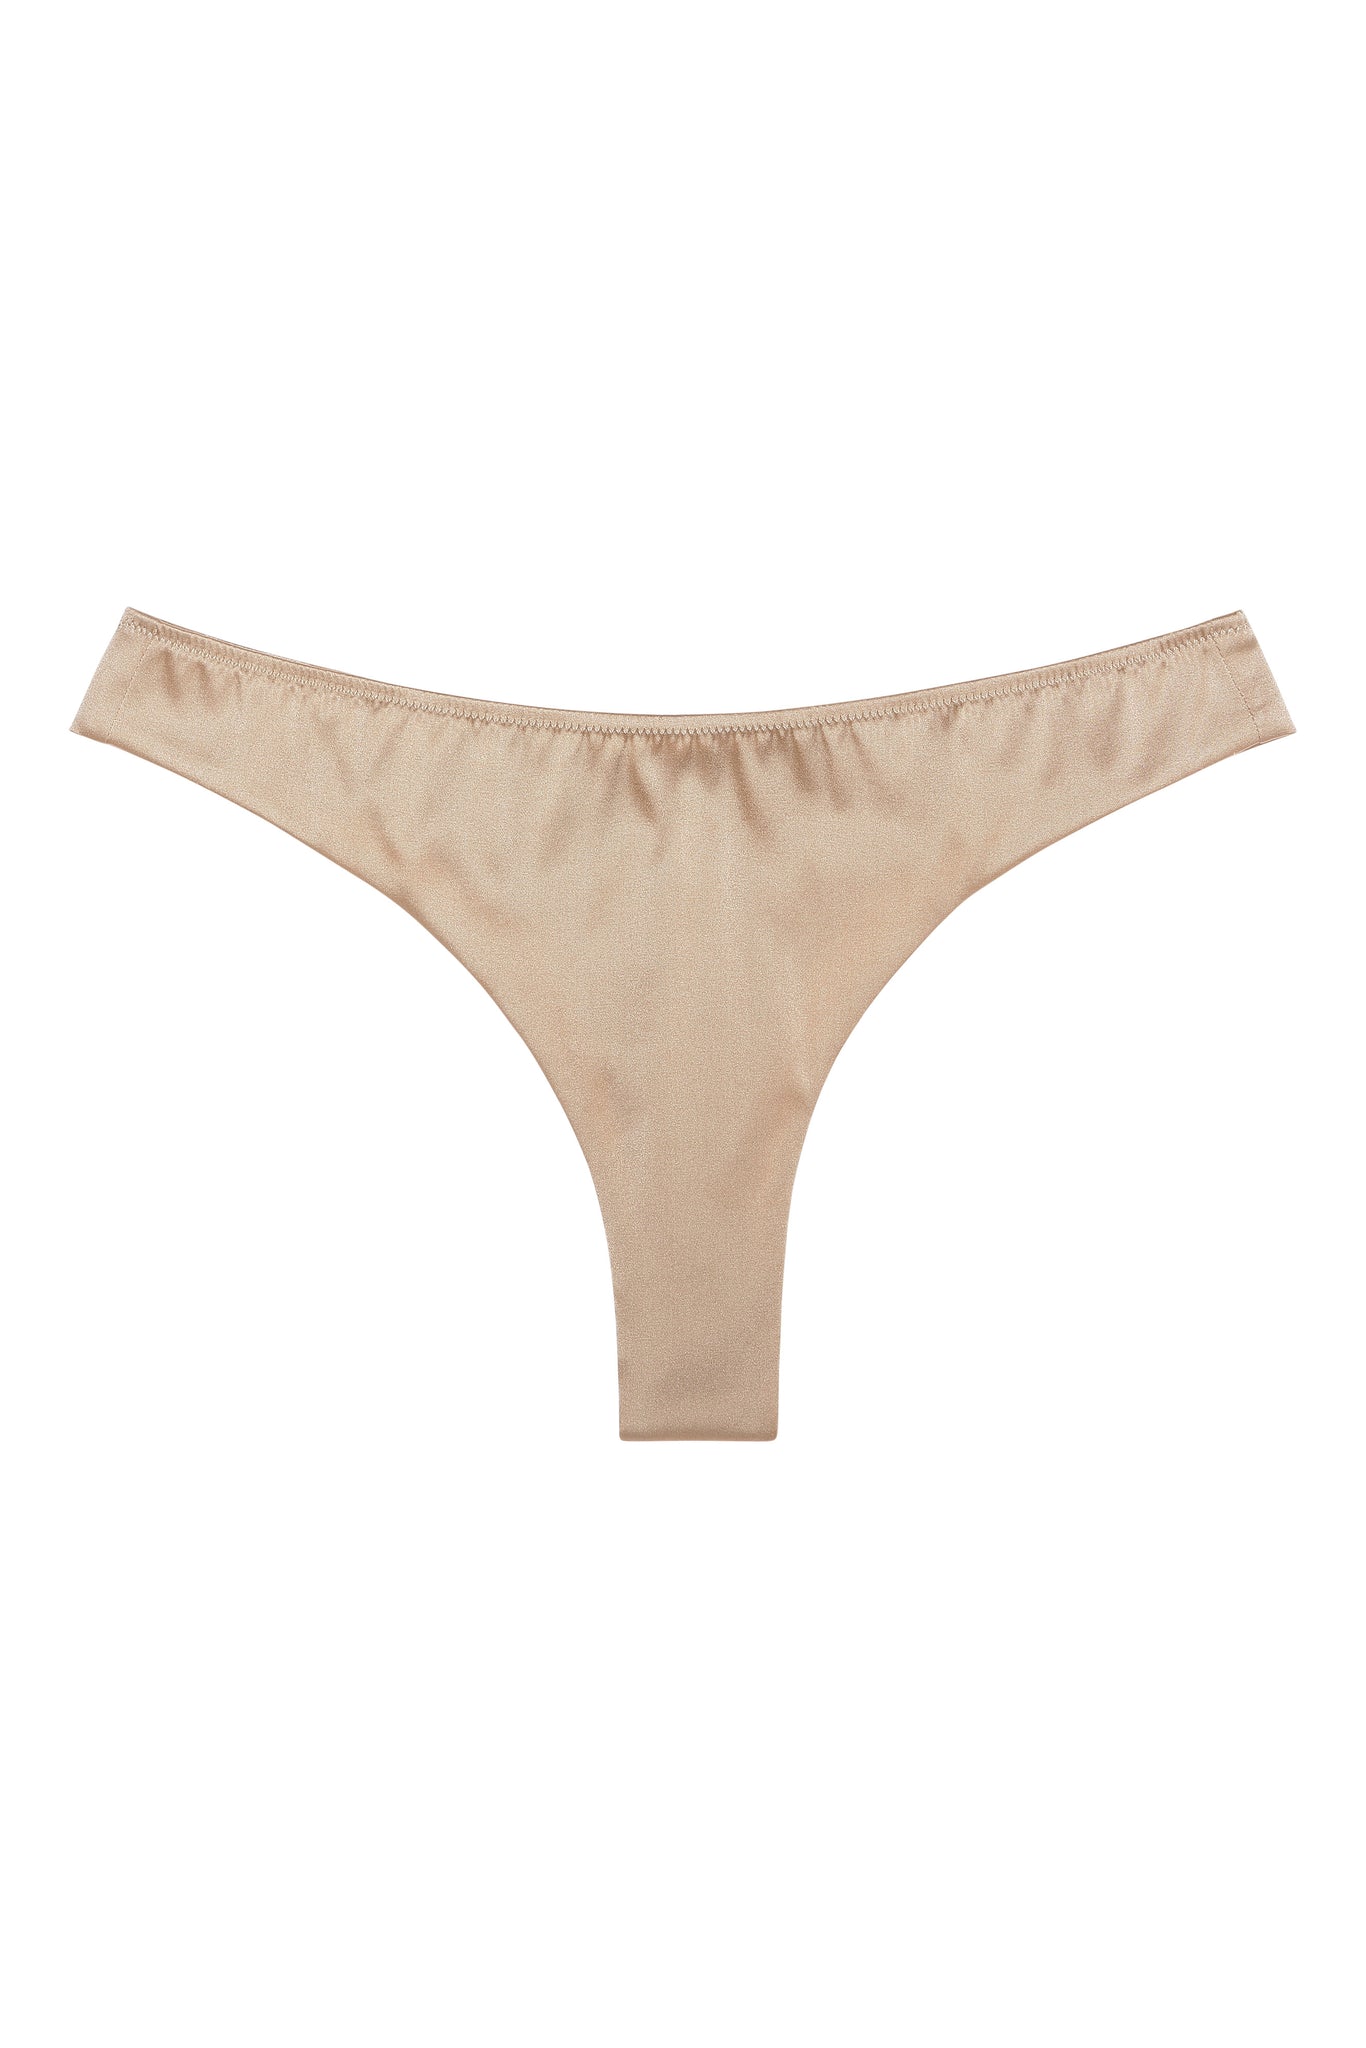 perfect nude effect underneath clothing ** Everyday Silk thong 1713